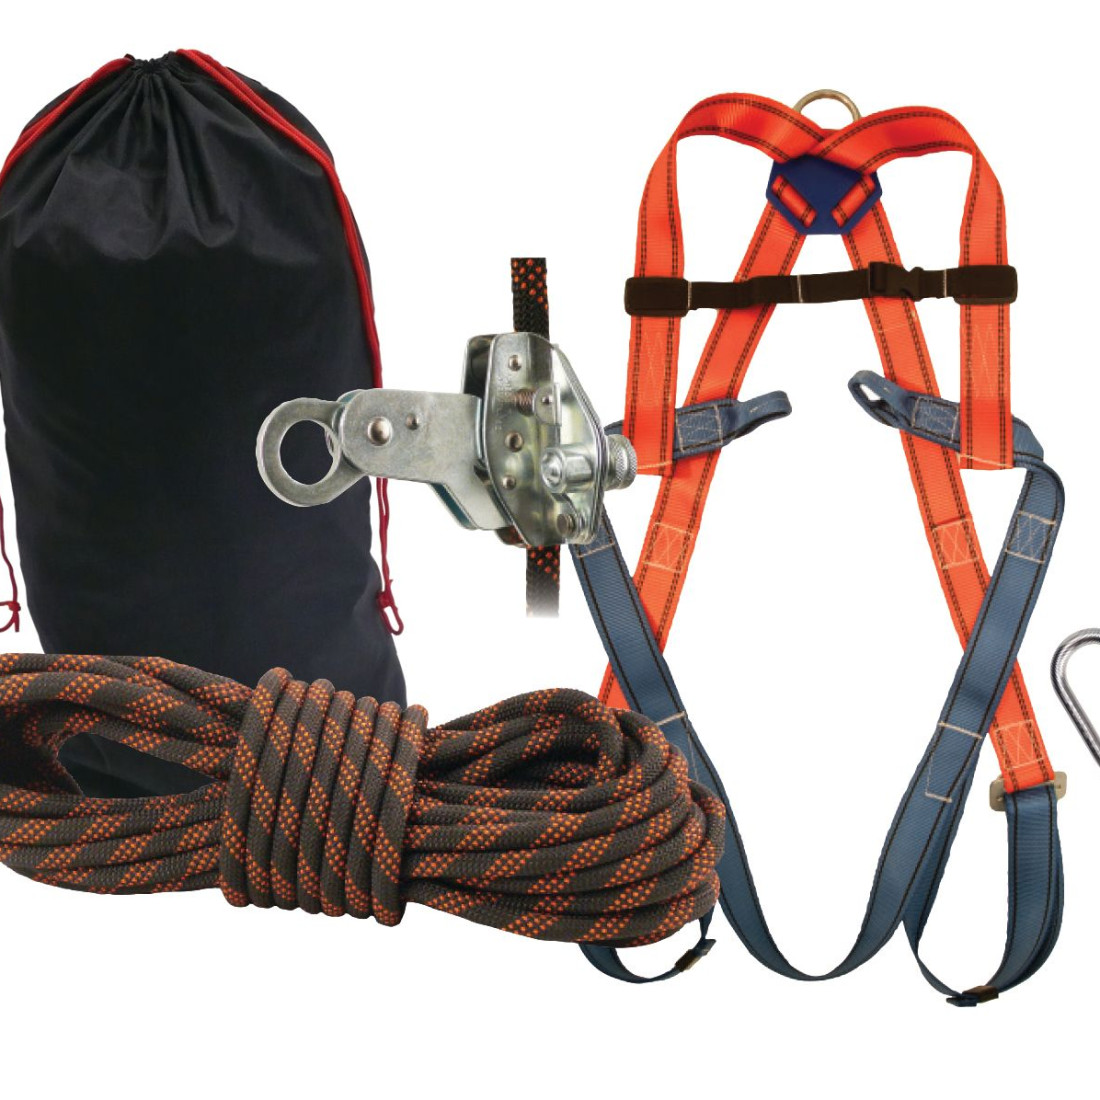 10m Roofing Kit - Personal protection